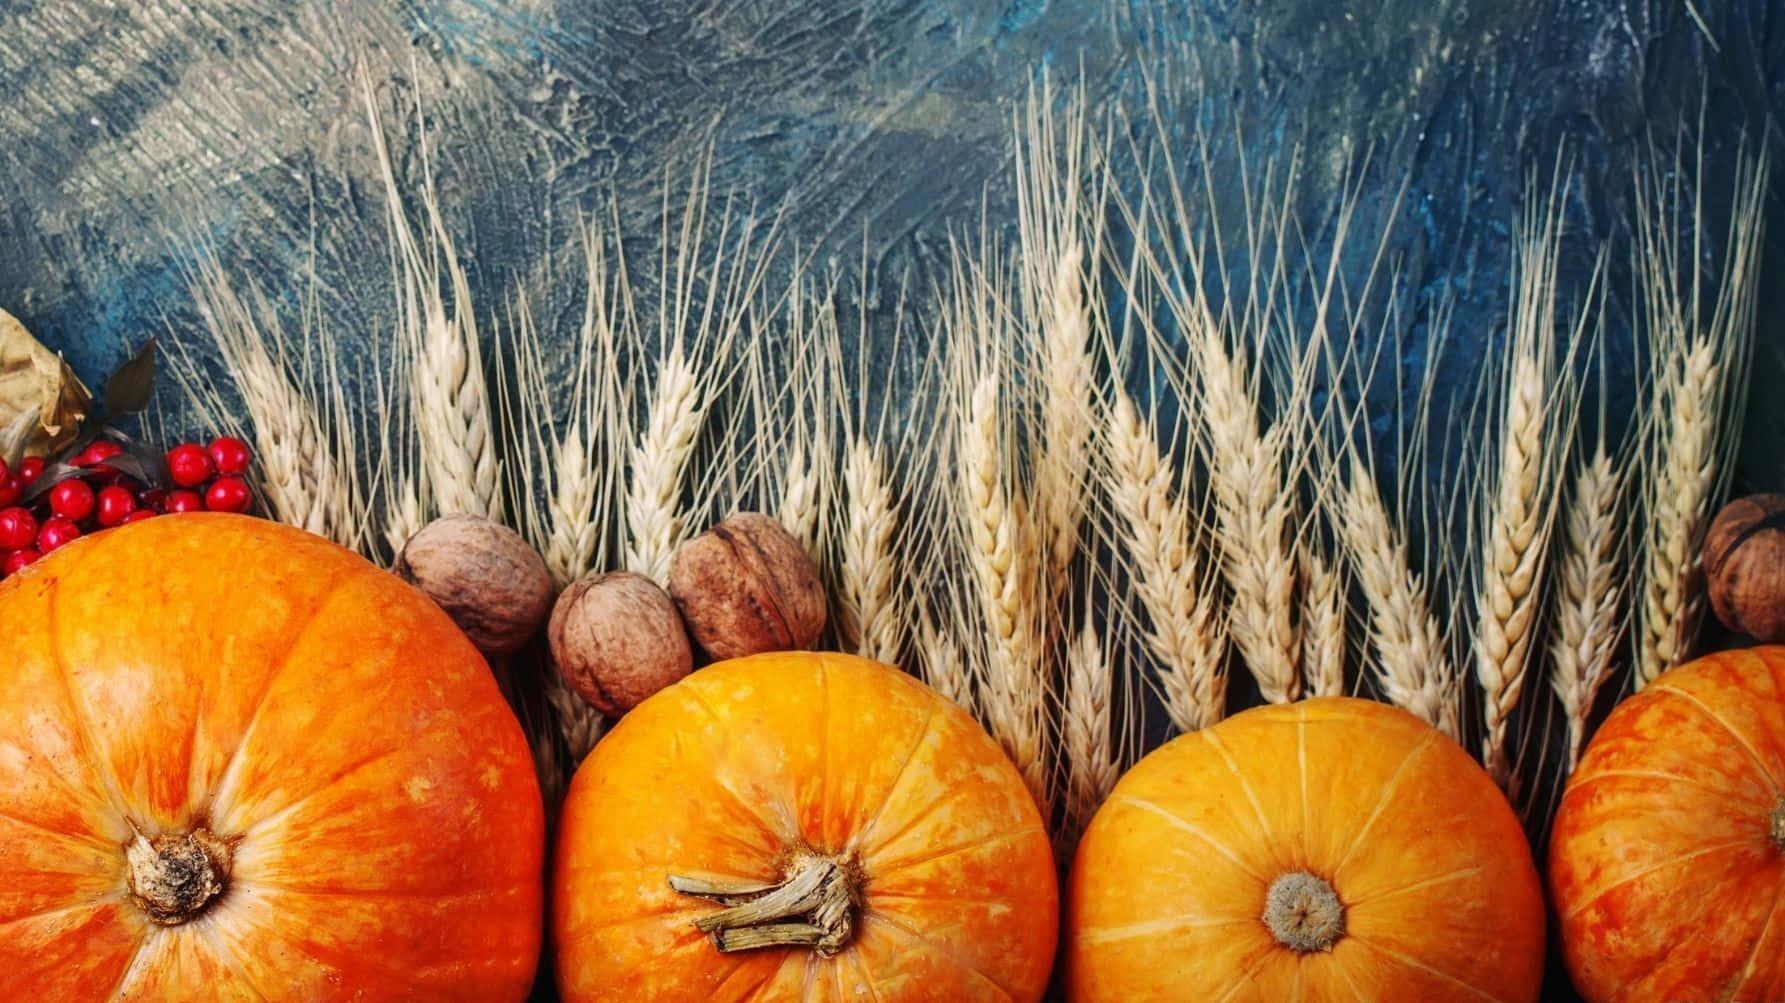 Pumpkins Pears Cranberries And Wheat On A Blue